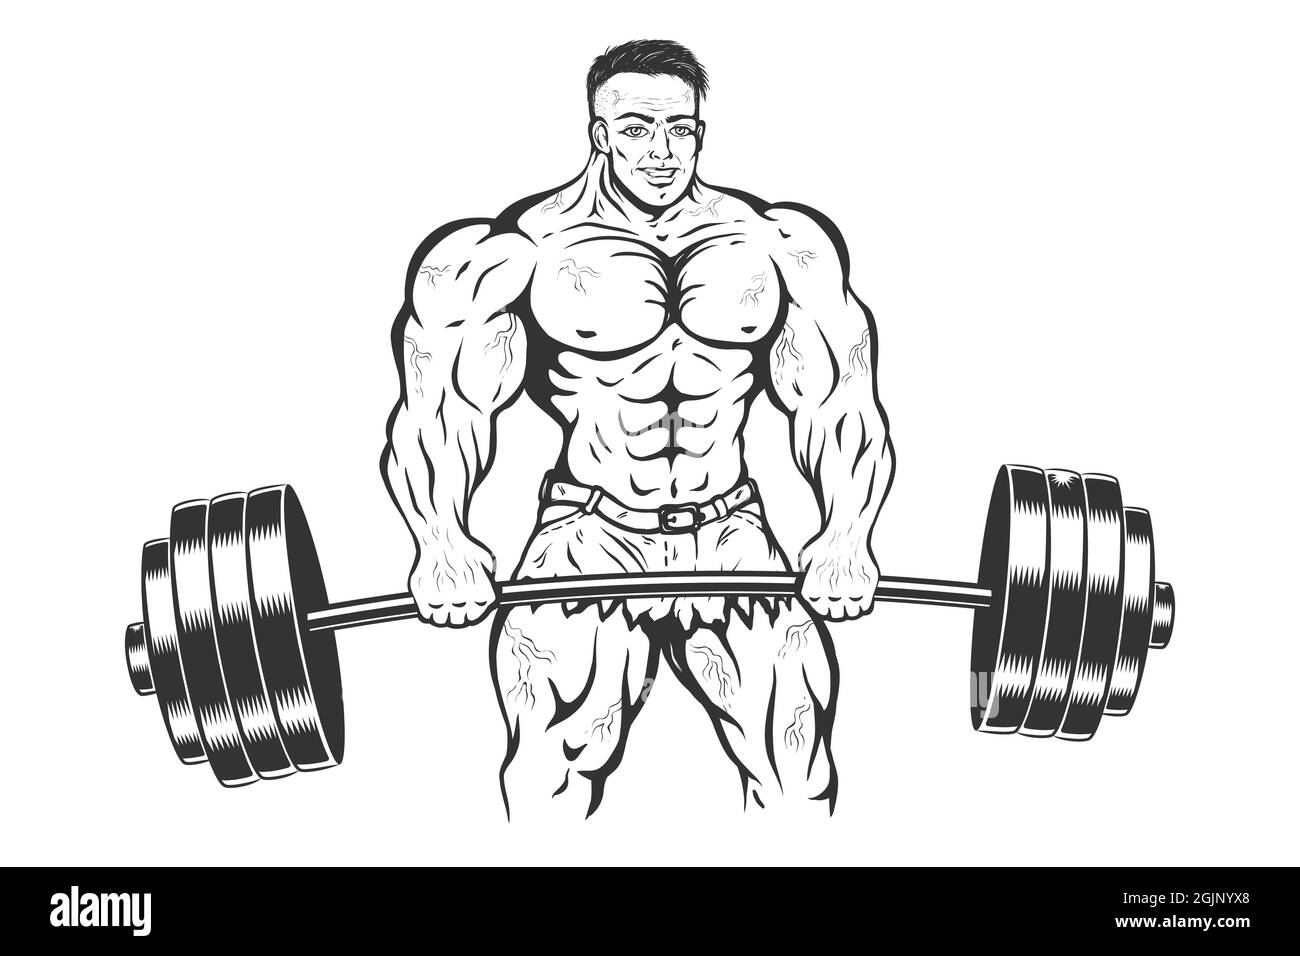 Bodybuilding Vintage: Over 16,385 Royalty-Free Licensable Stock